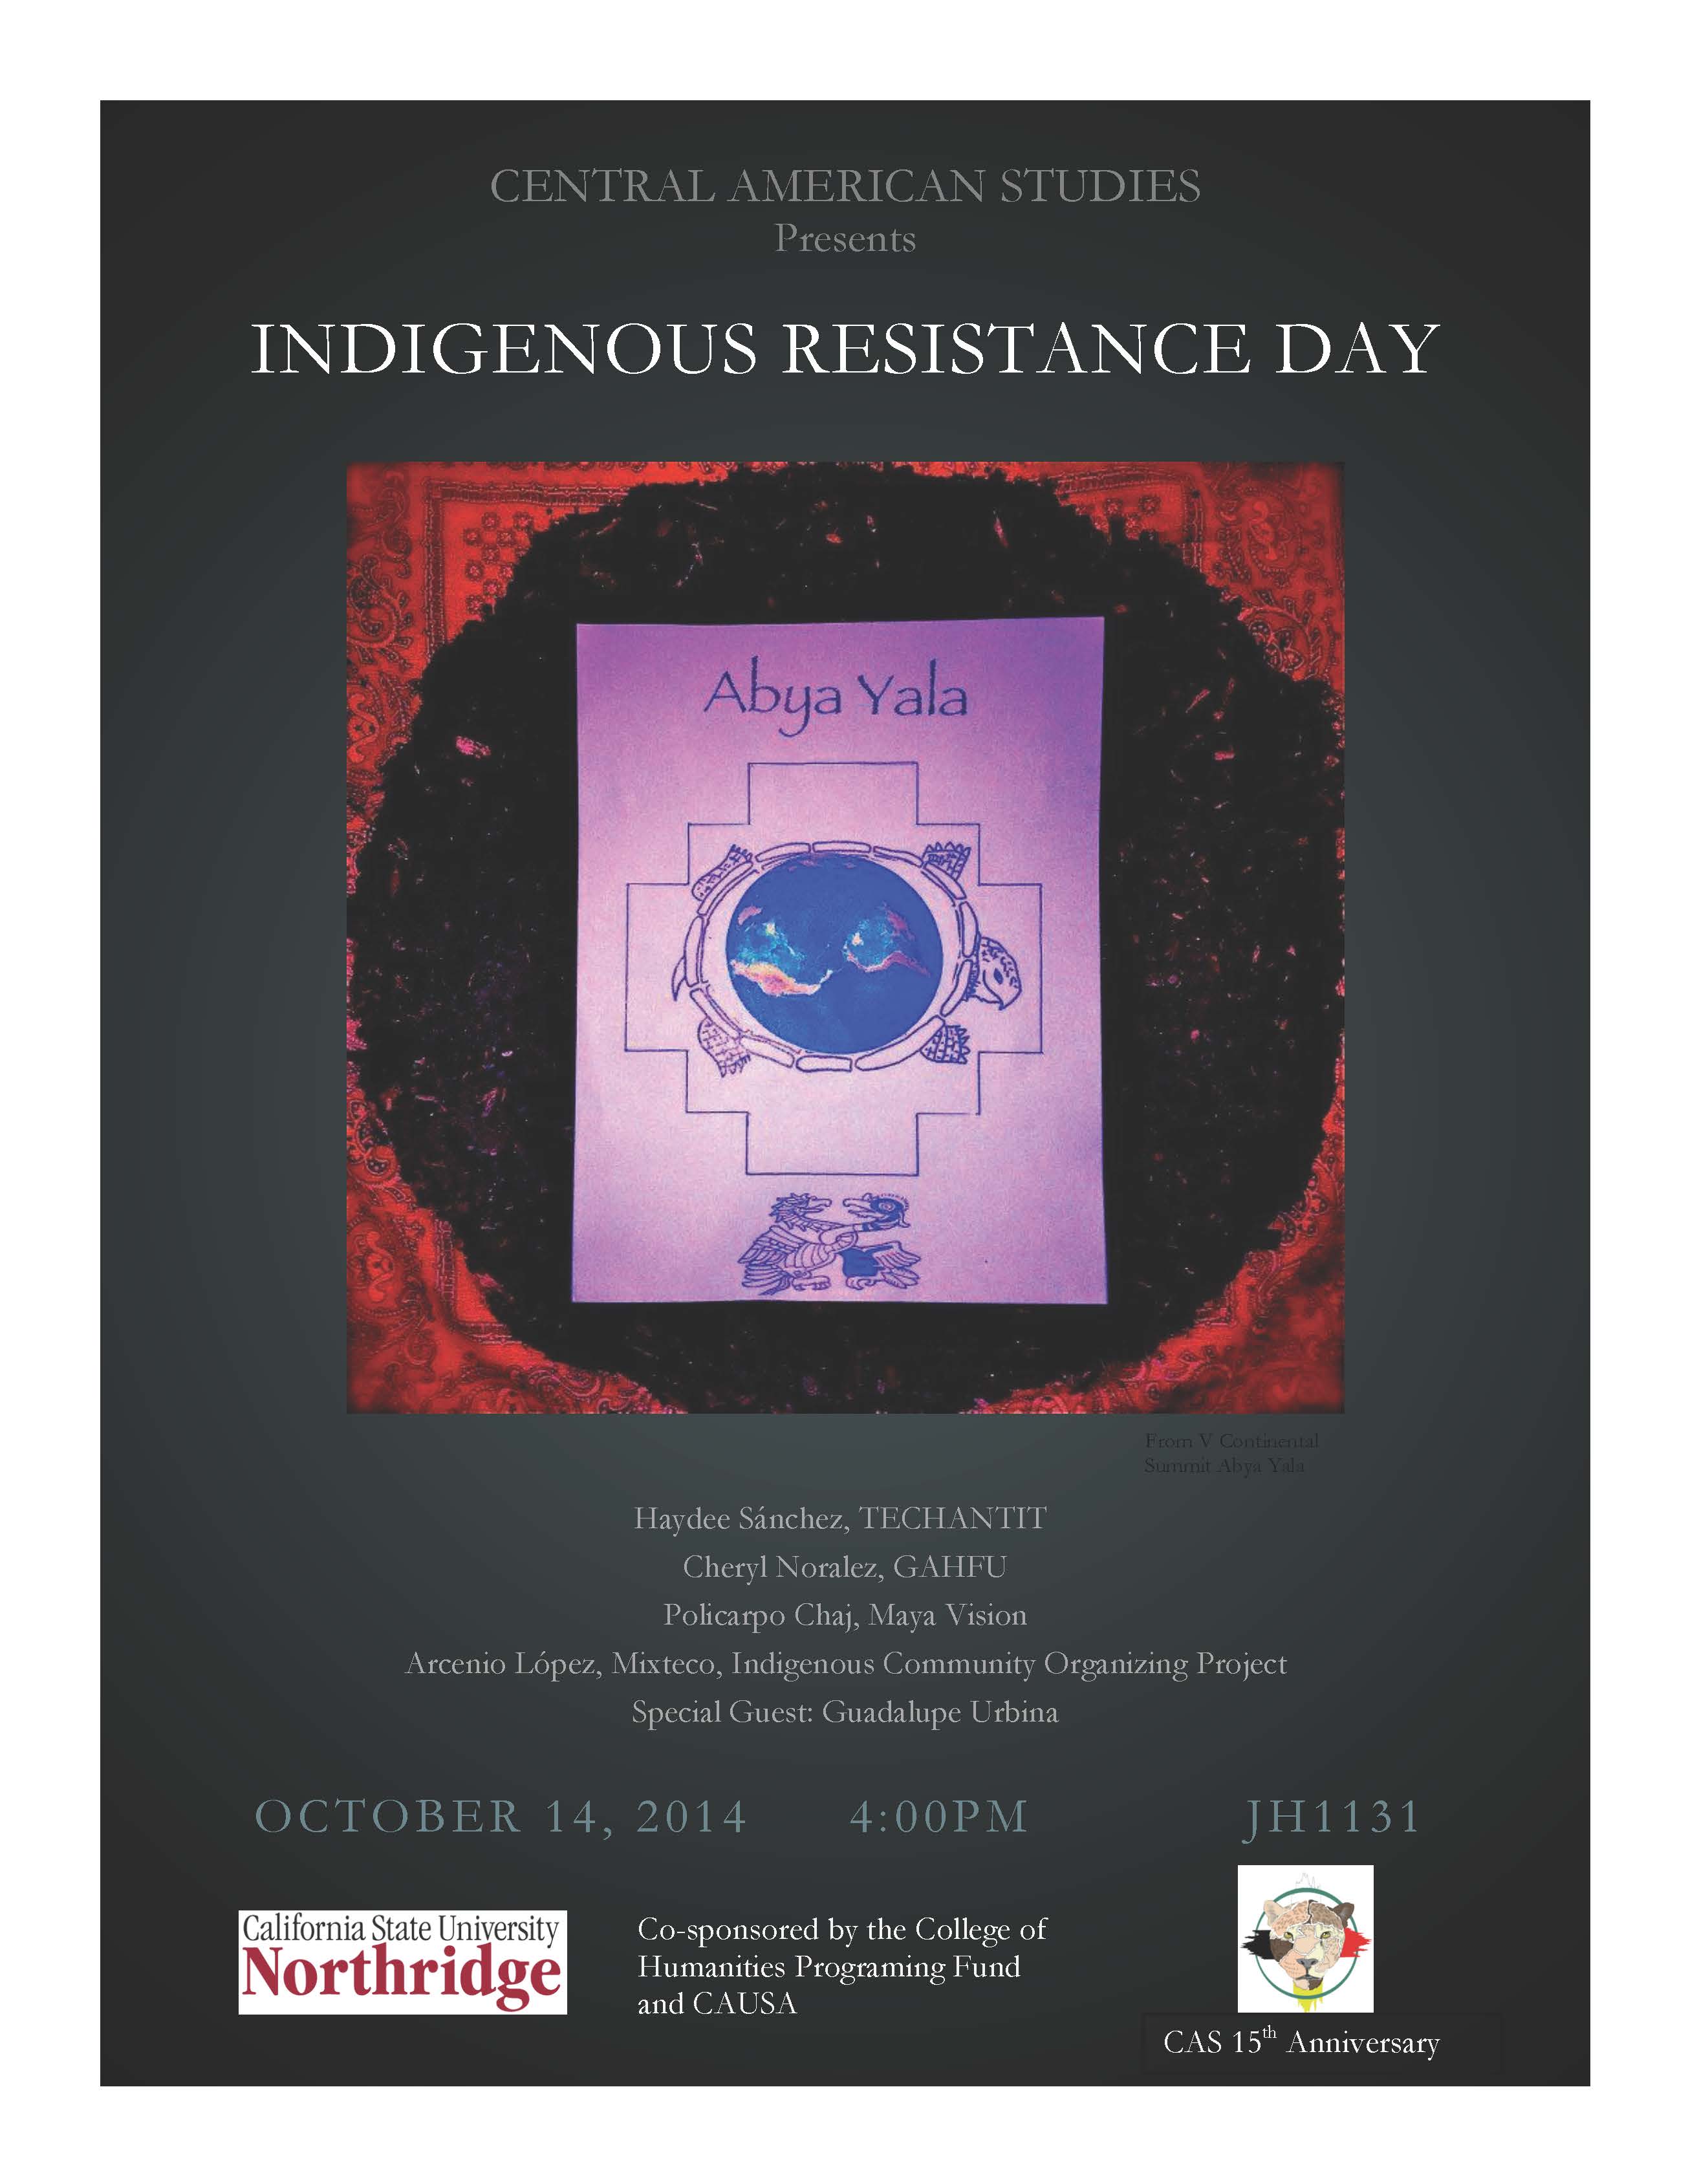 Indigenous People Day October 14, 6:00 to Midnight